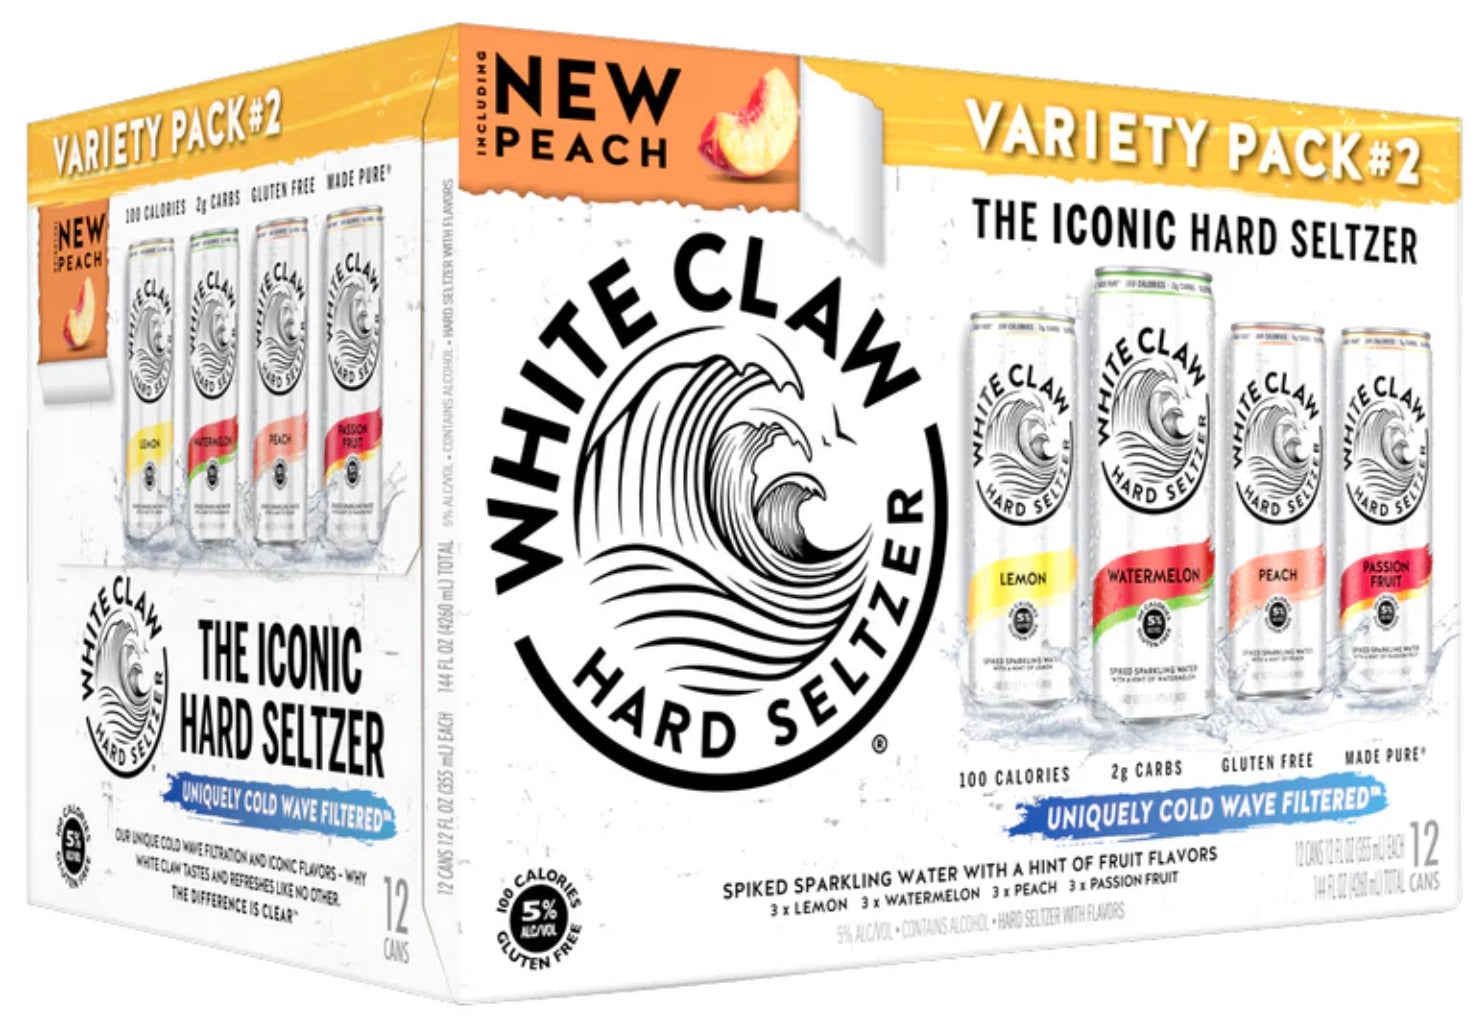 White Claw Variety Pack #2